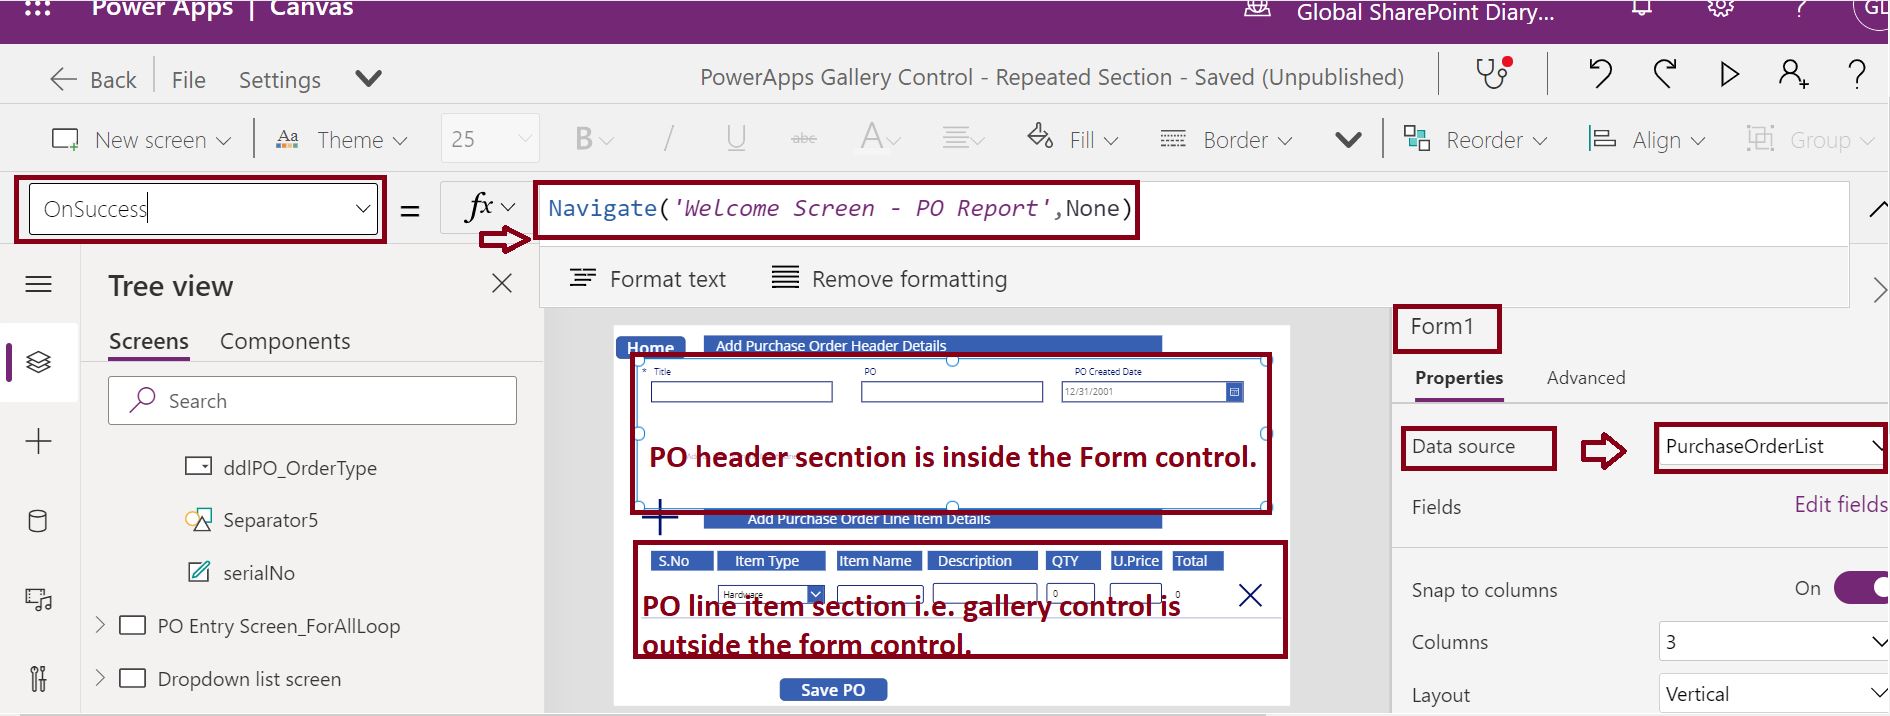 PowerApps navigate to home page on successful submission of the form